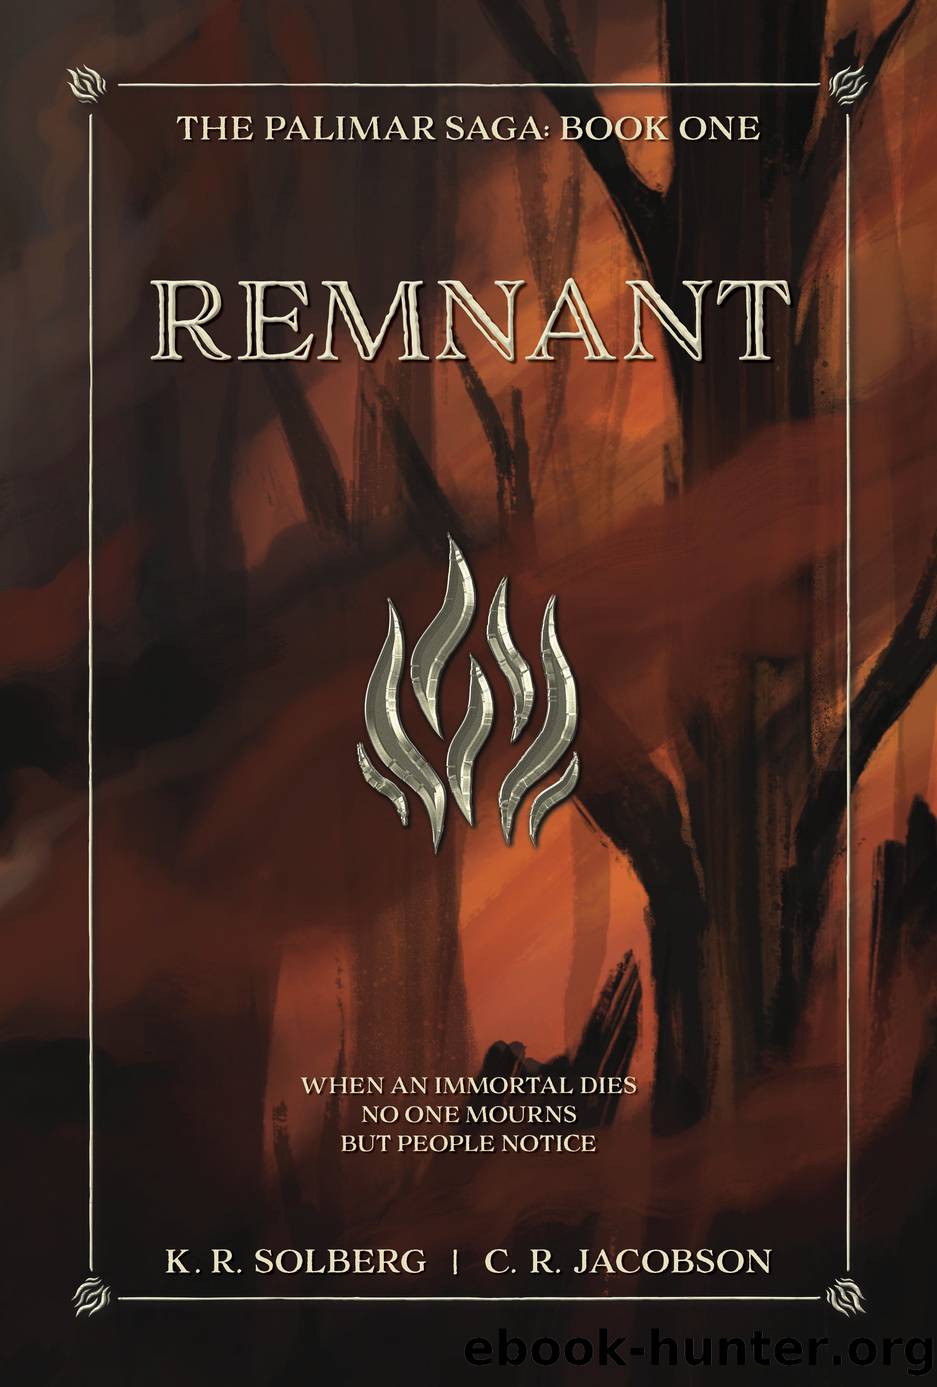 Remnant by K. R. Solberg